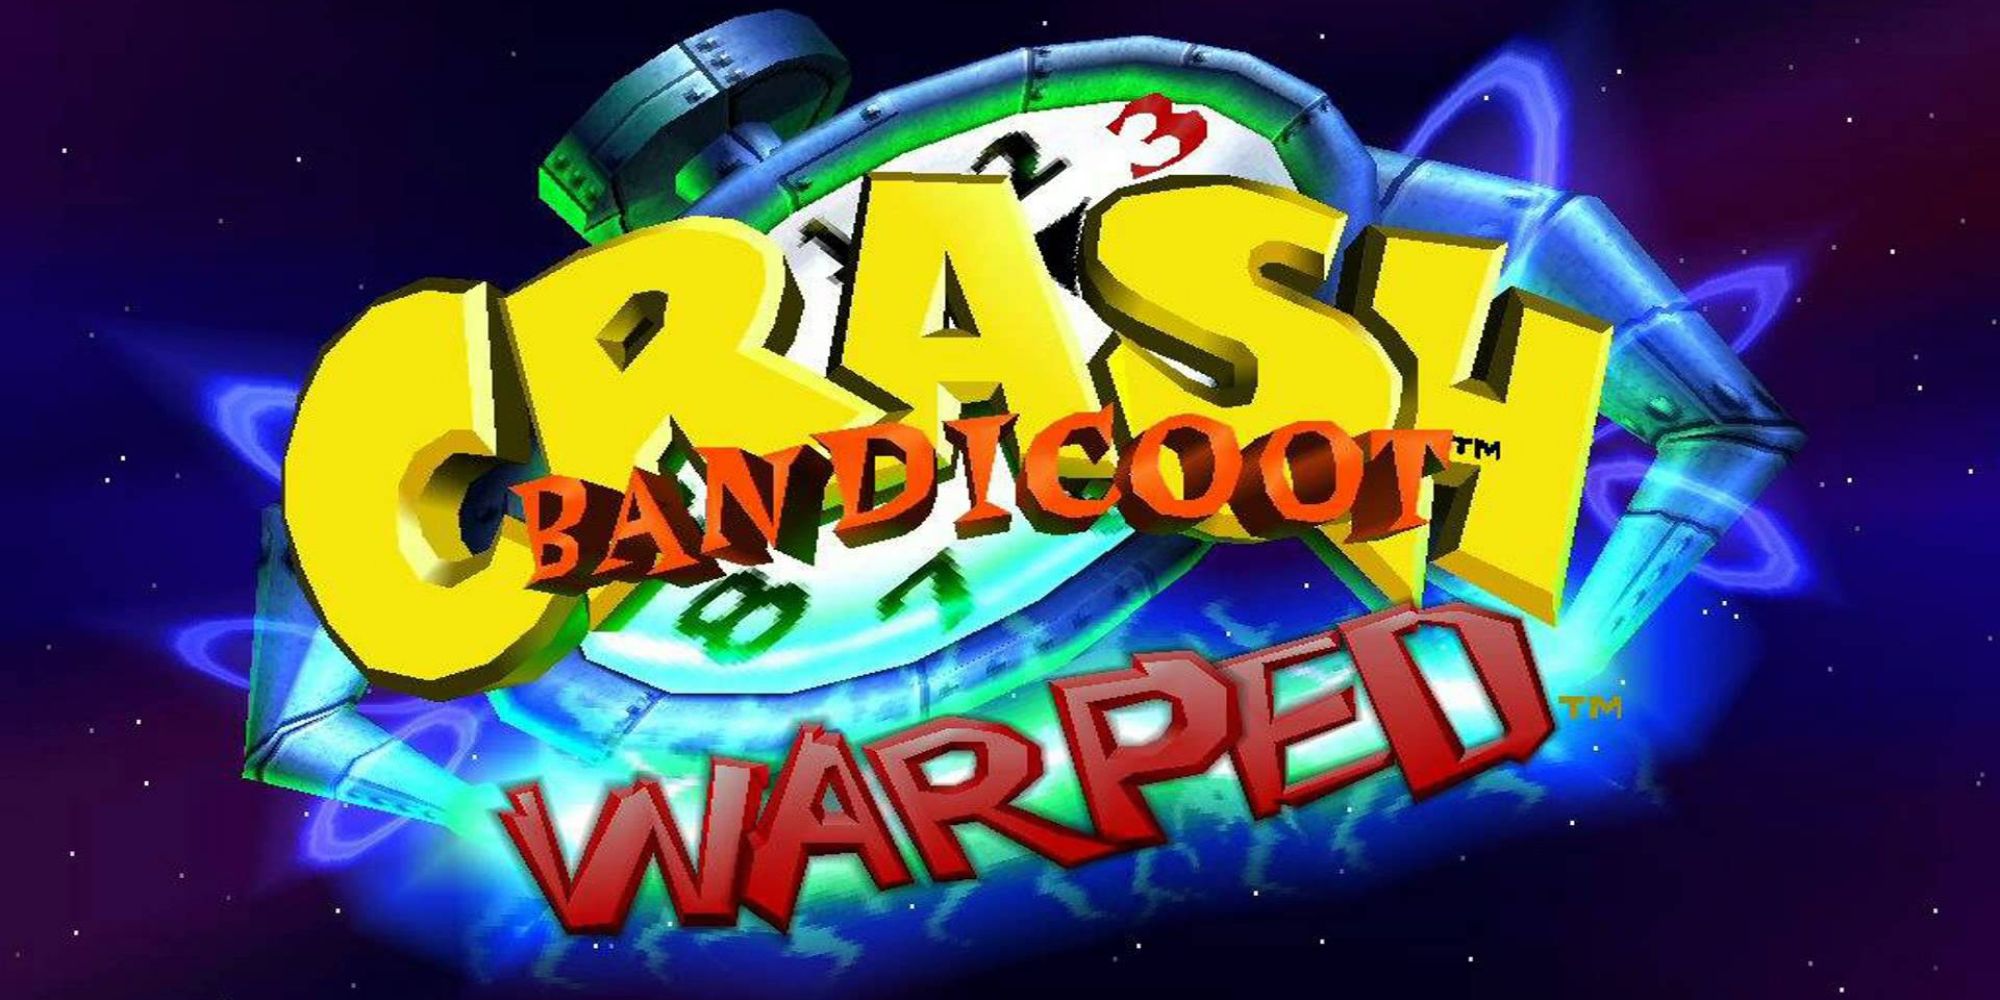 The title screen of the game Crash Bandicoot 3: Warped with his name engulfed in blue electricity in front of a timer.